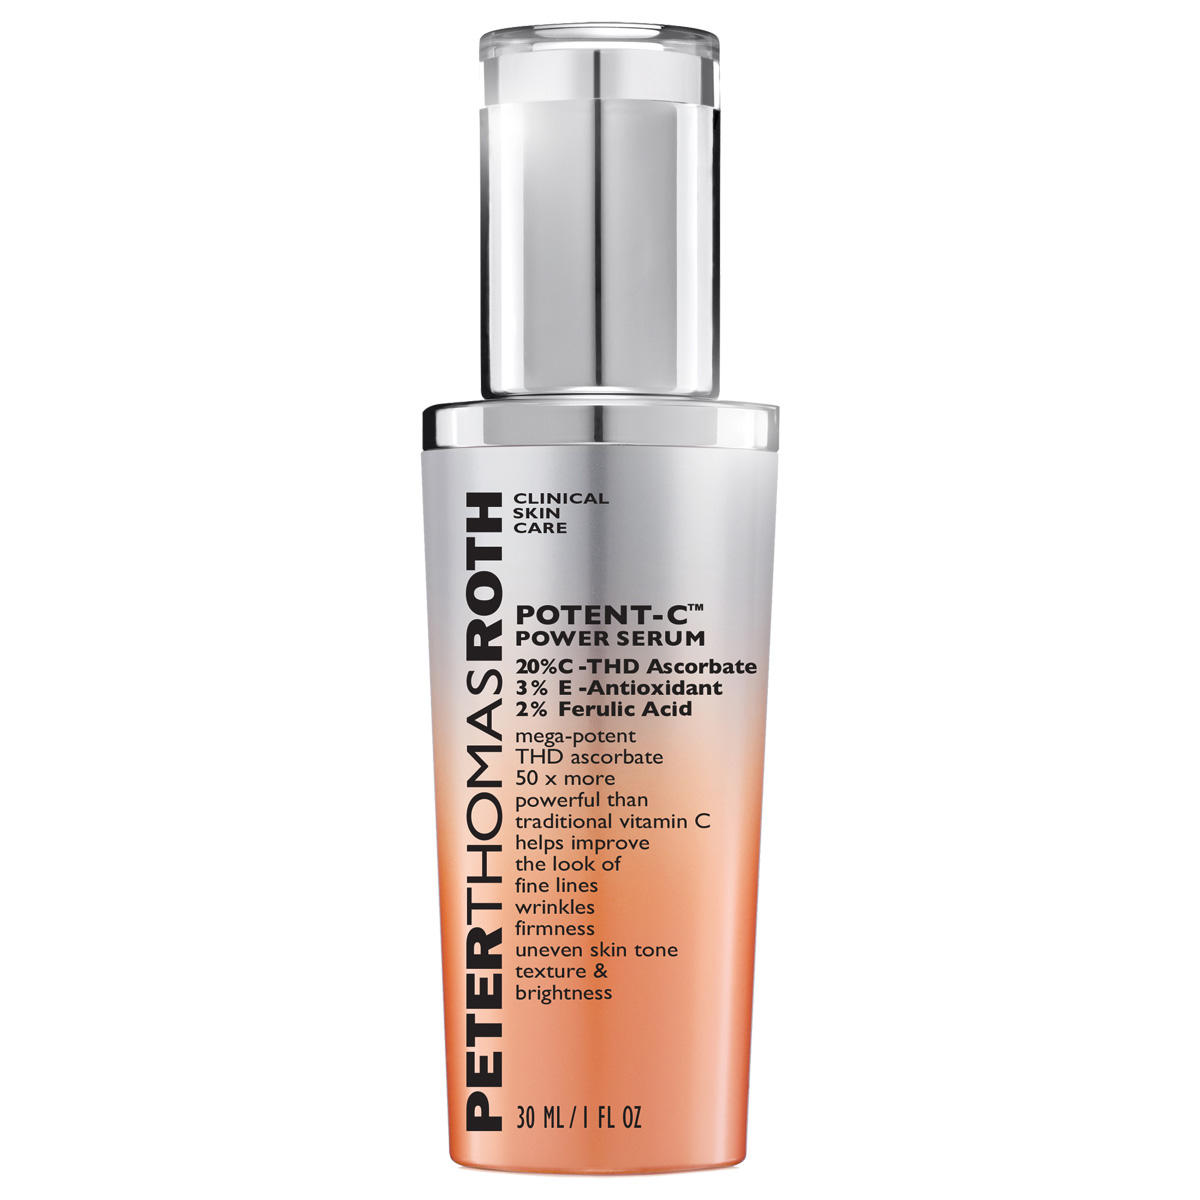 PETER THOMAS ROTH CLINICAL SKIN CARE Potent-C Power Serum 30 ml - 1